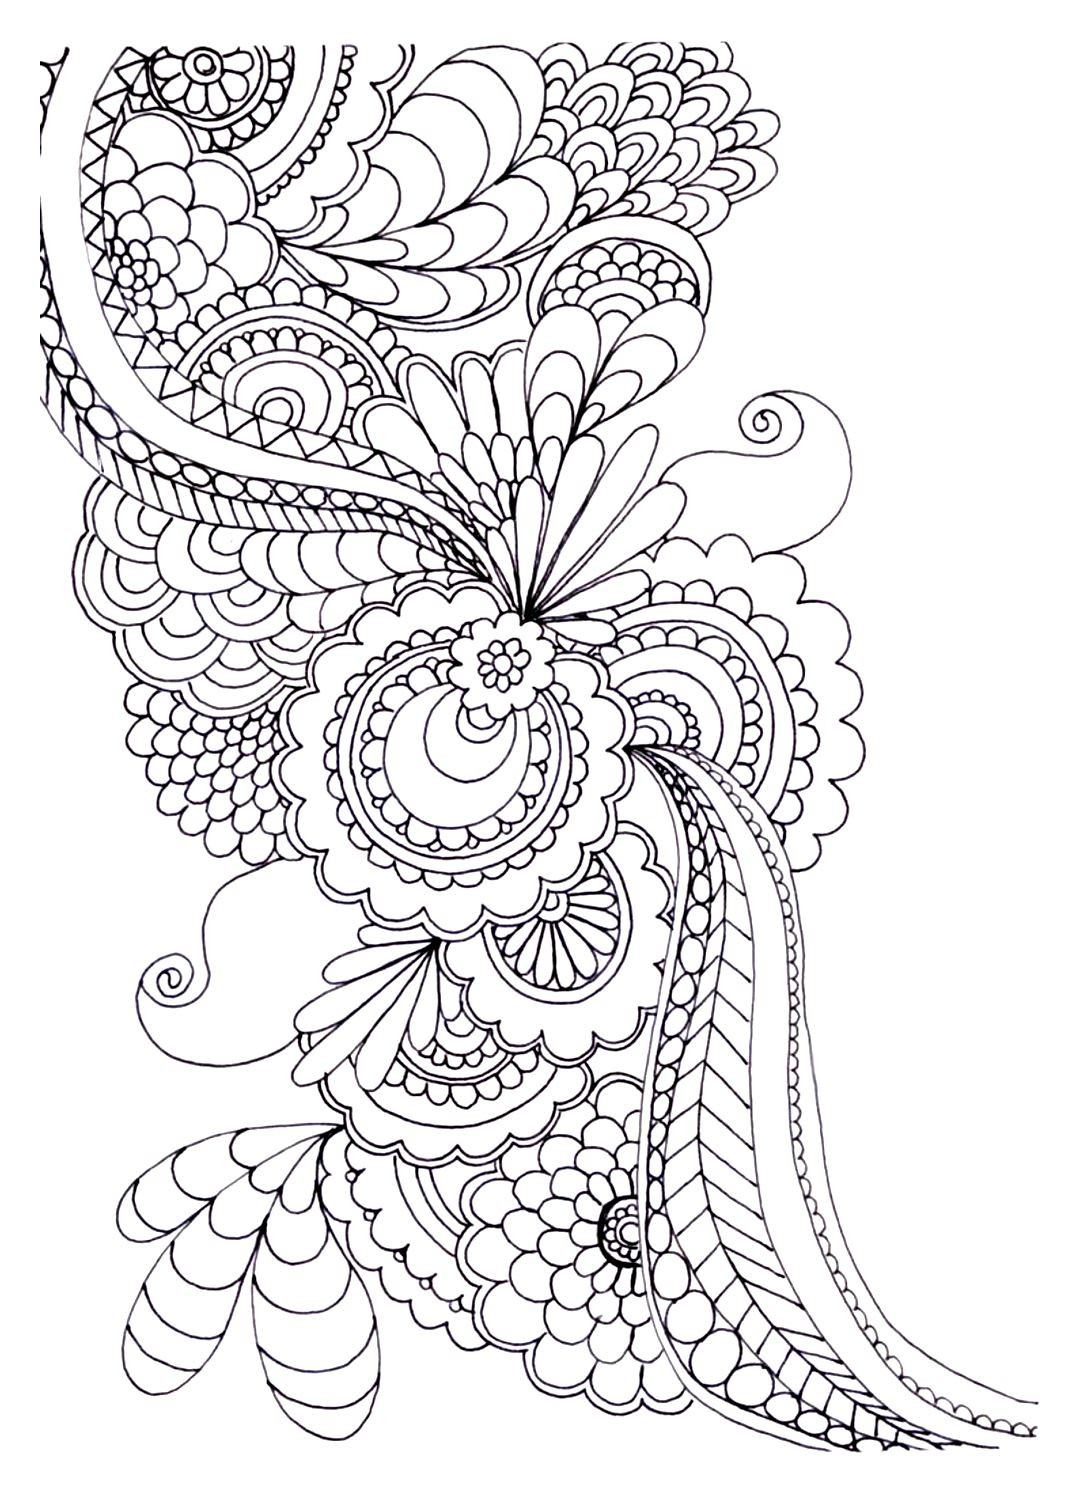 Printable Adult Coloring Pages Free
 20 Free Adult Colouring Pages The Organised Housewife